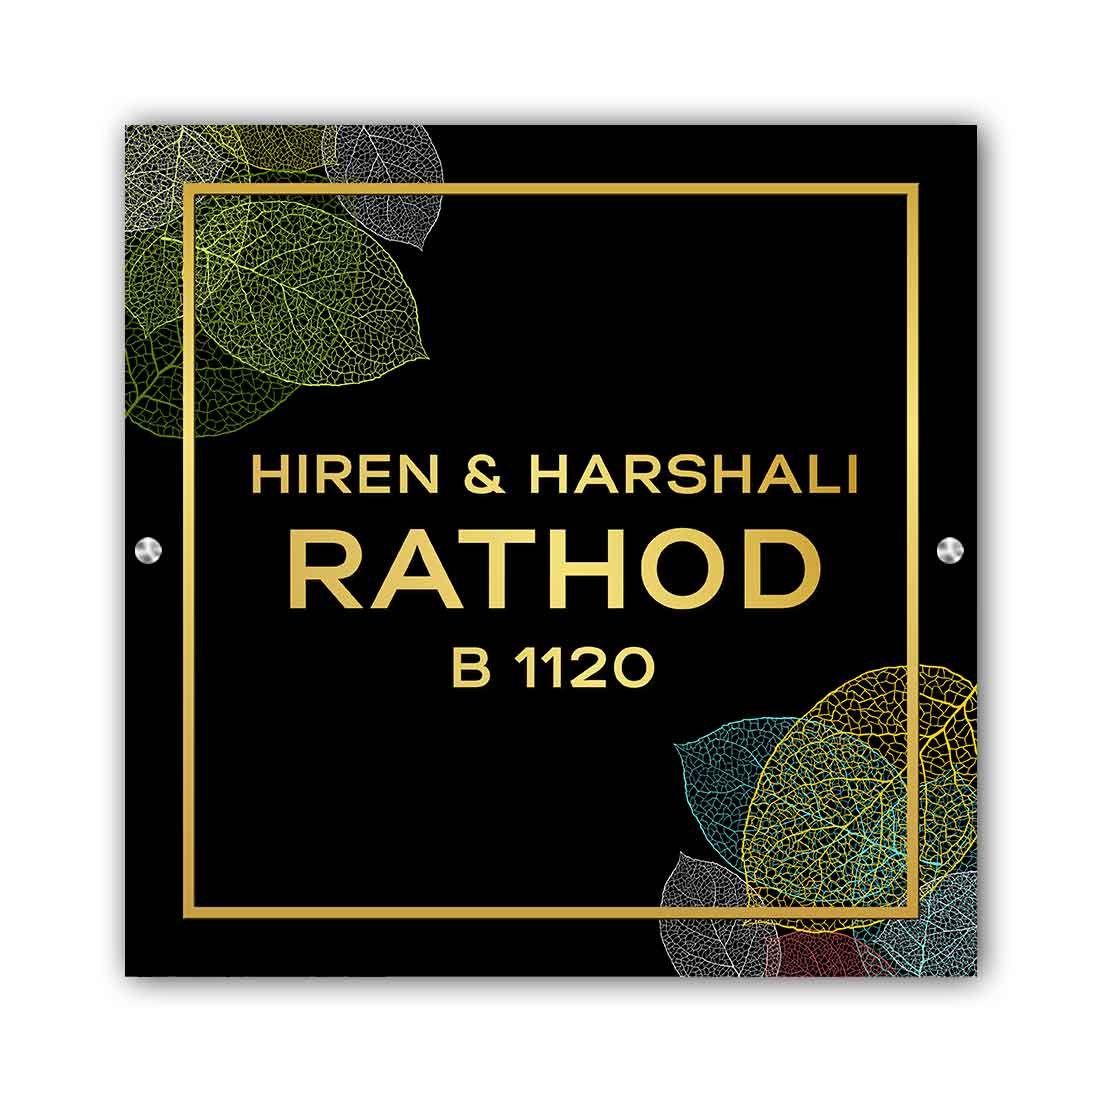 Designer Acrylic Name Plate with Golden 3D Fonts